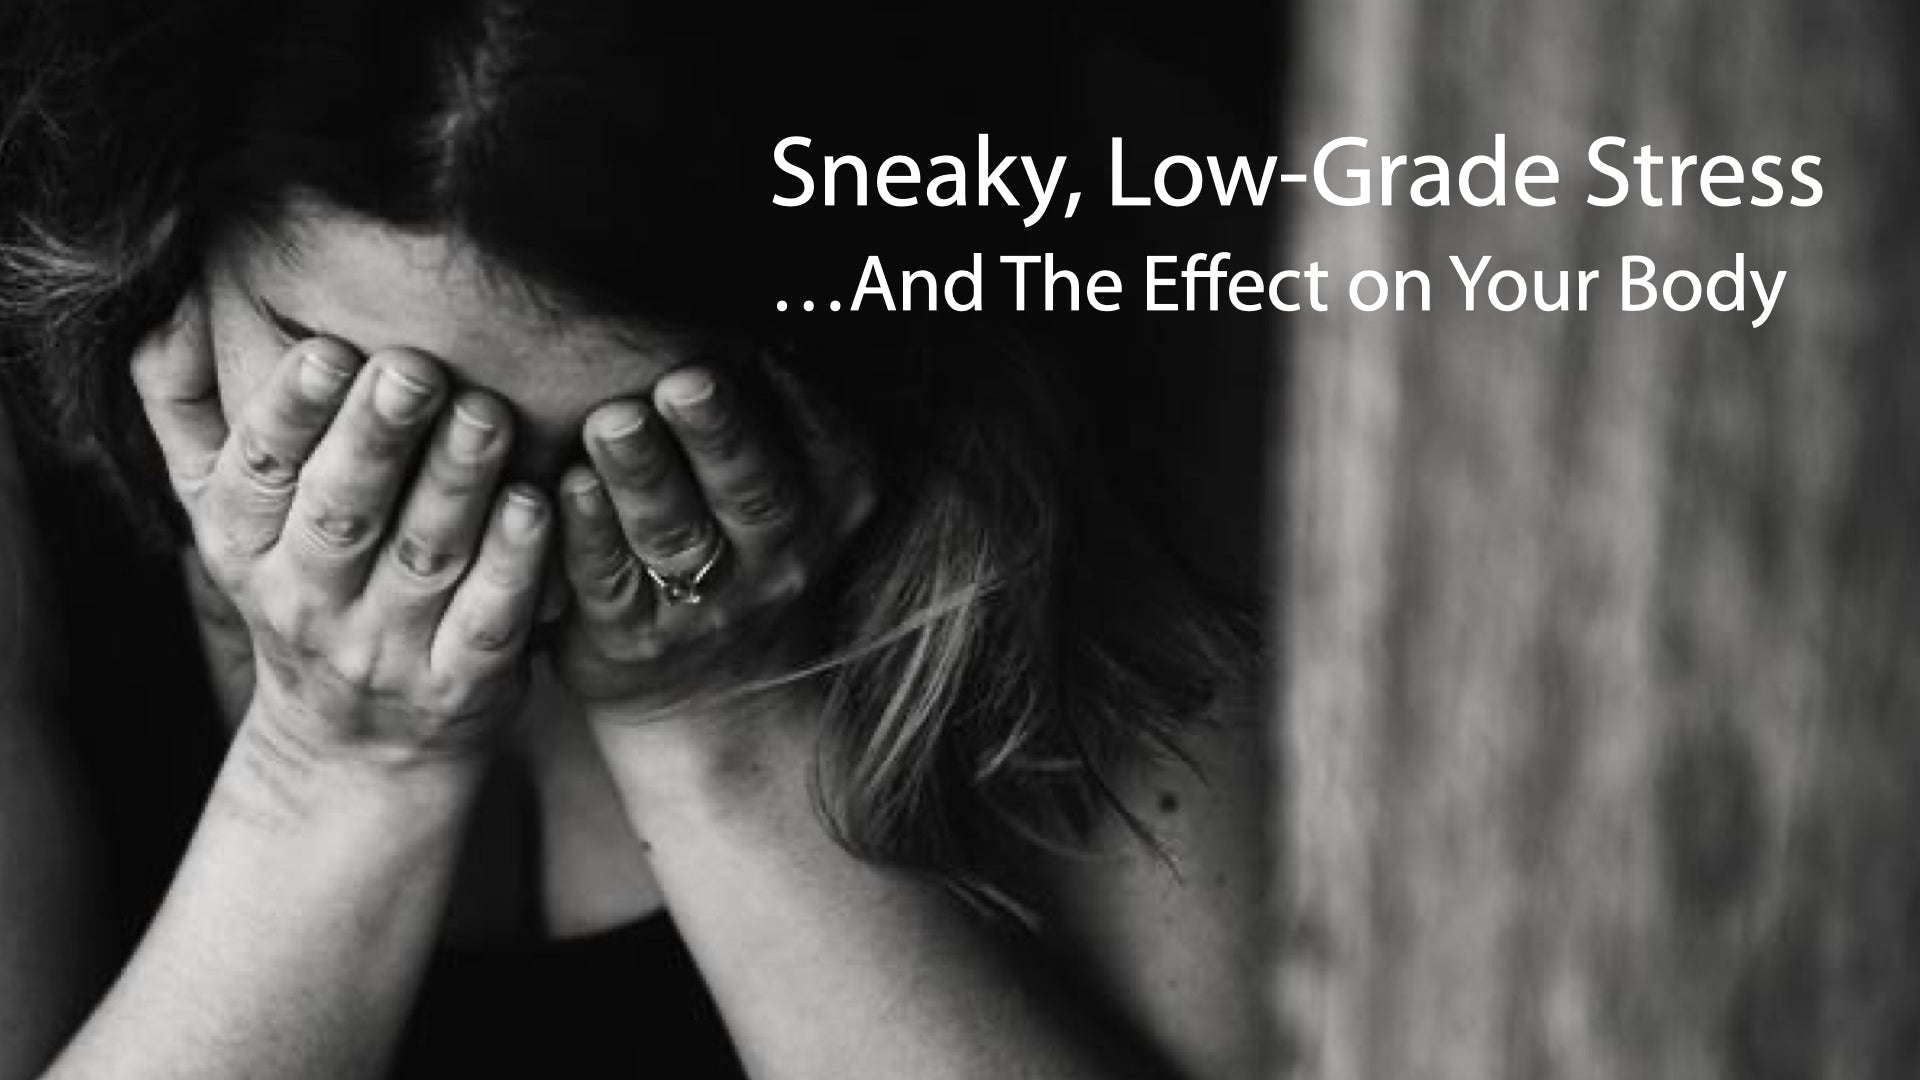 Sneaky, Low-Grade Stress and The Effect on Your Body